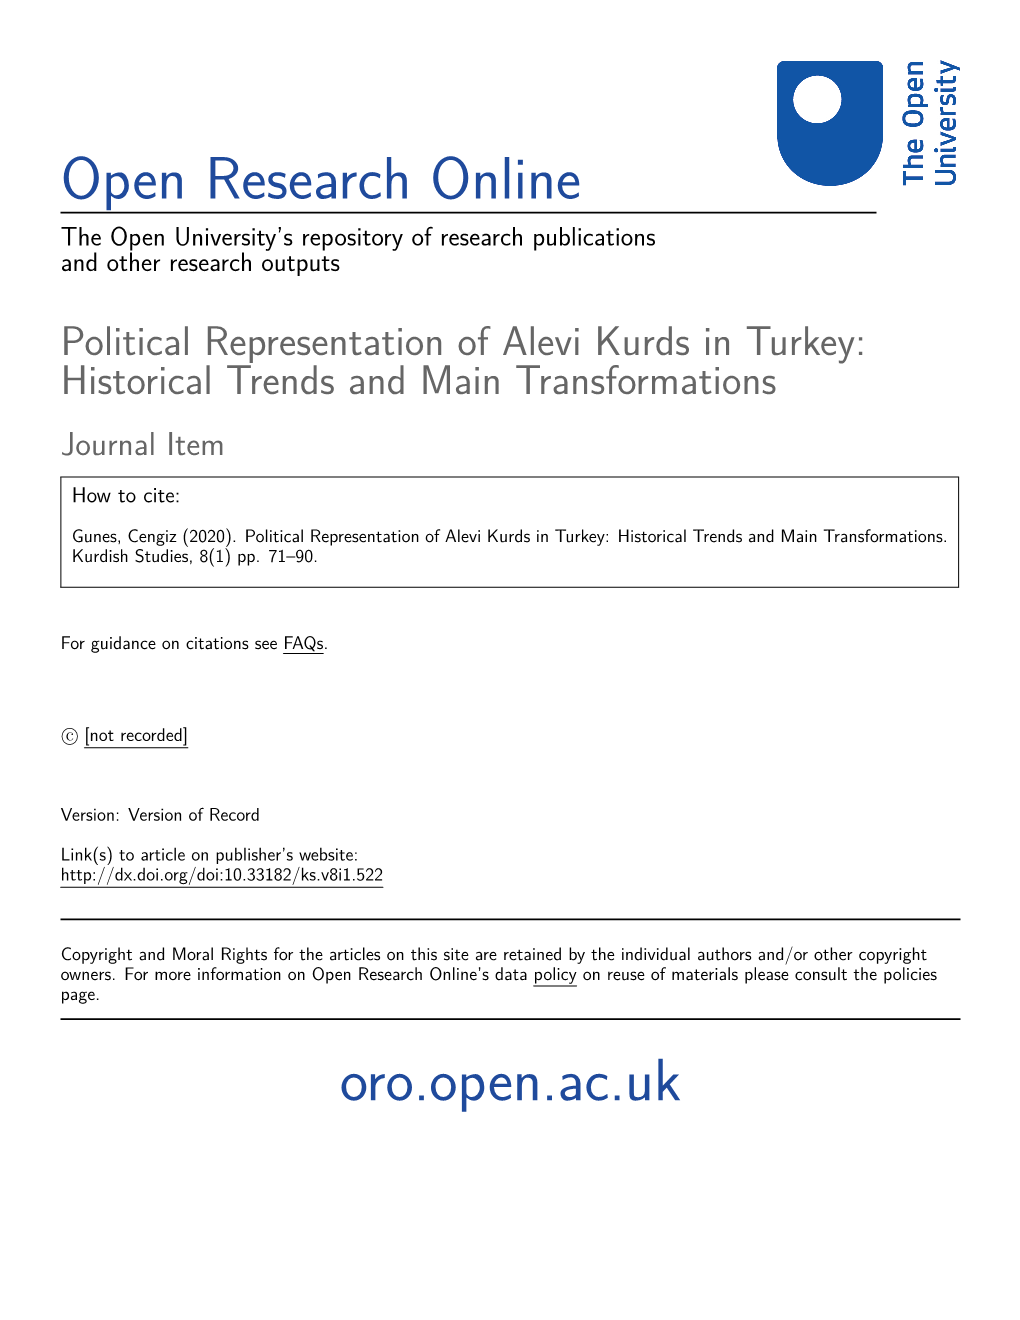 Political Representation of Alevi Kurds in Turkey: Historical Trends and Main Transformations Journal Item